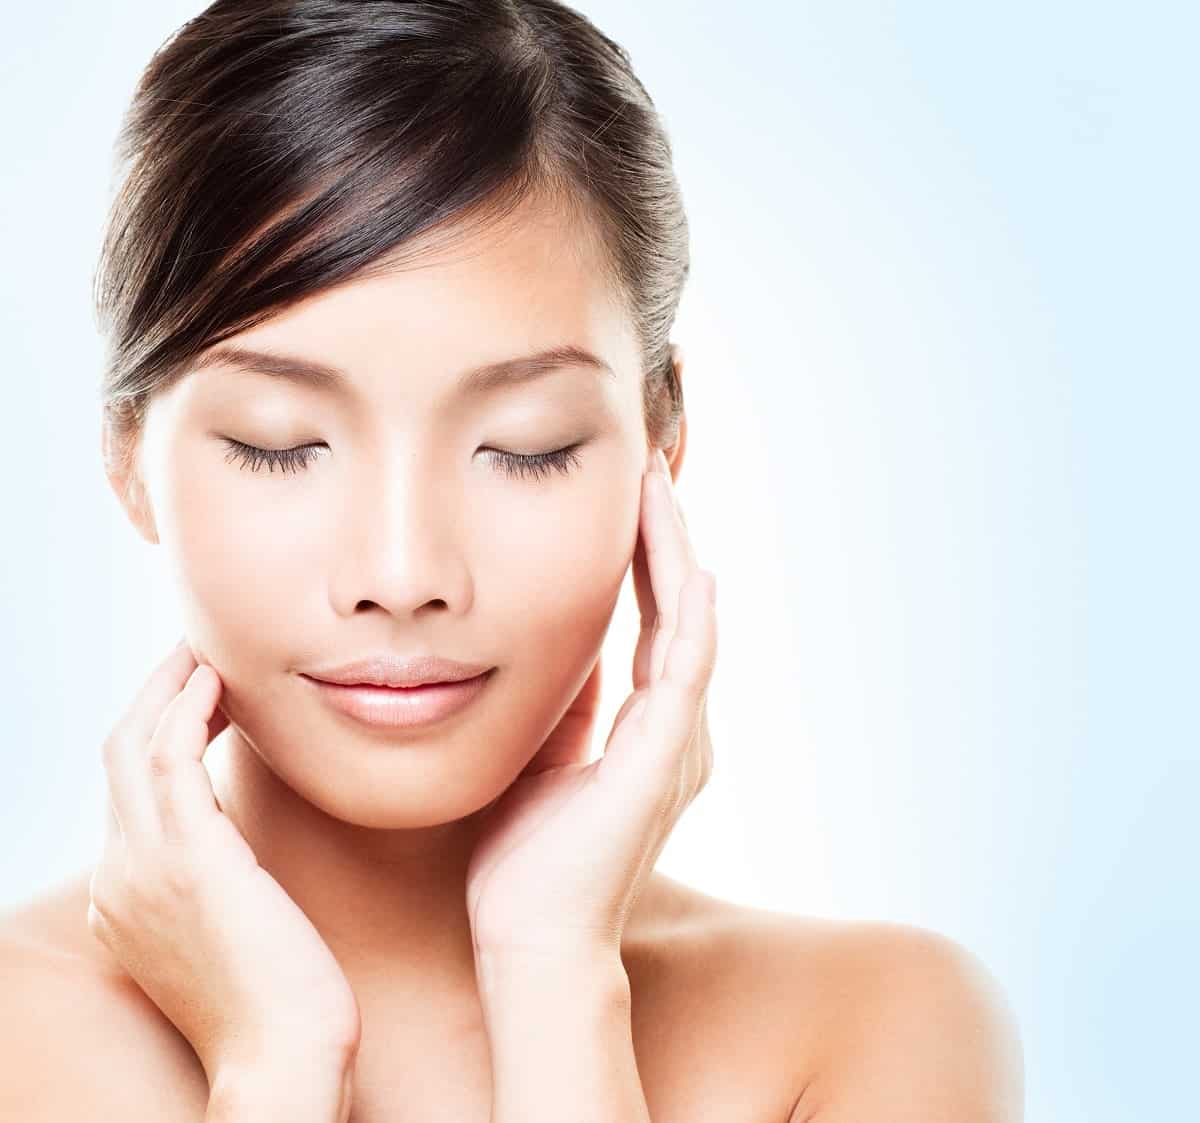 Chicago surgeon Dr. Michael Byun specializes in the midface facelift